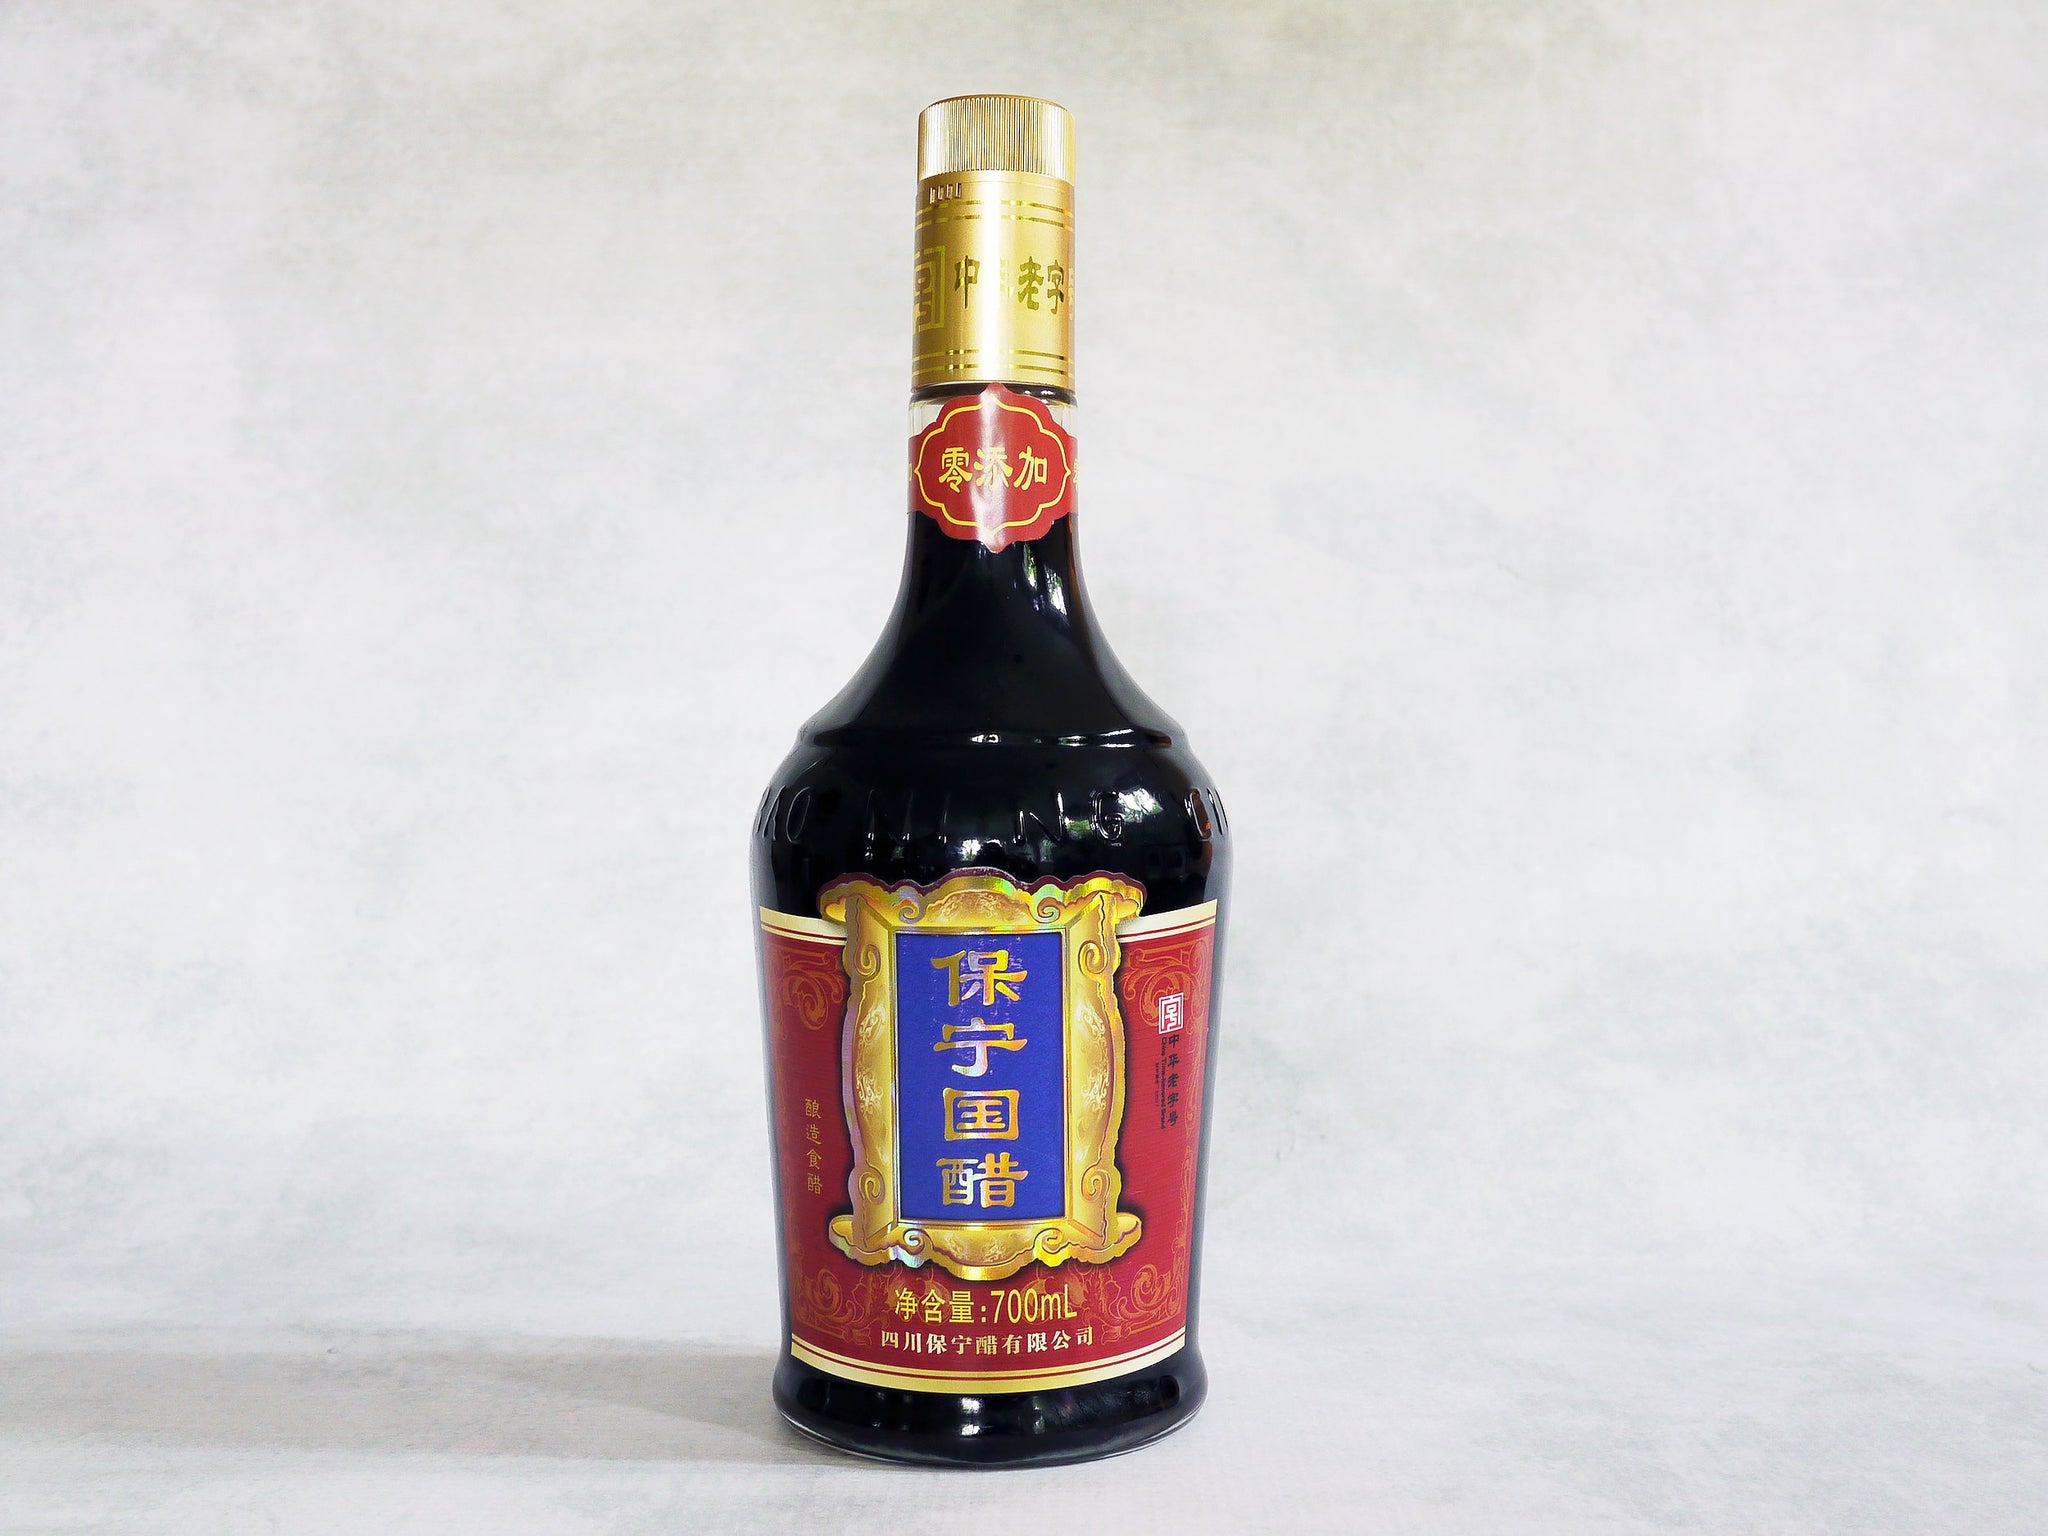 Baoning Handcrafted Vinegar, Aged 10 Years